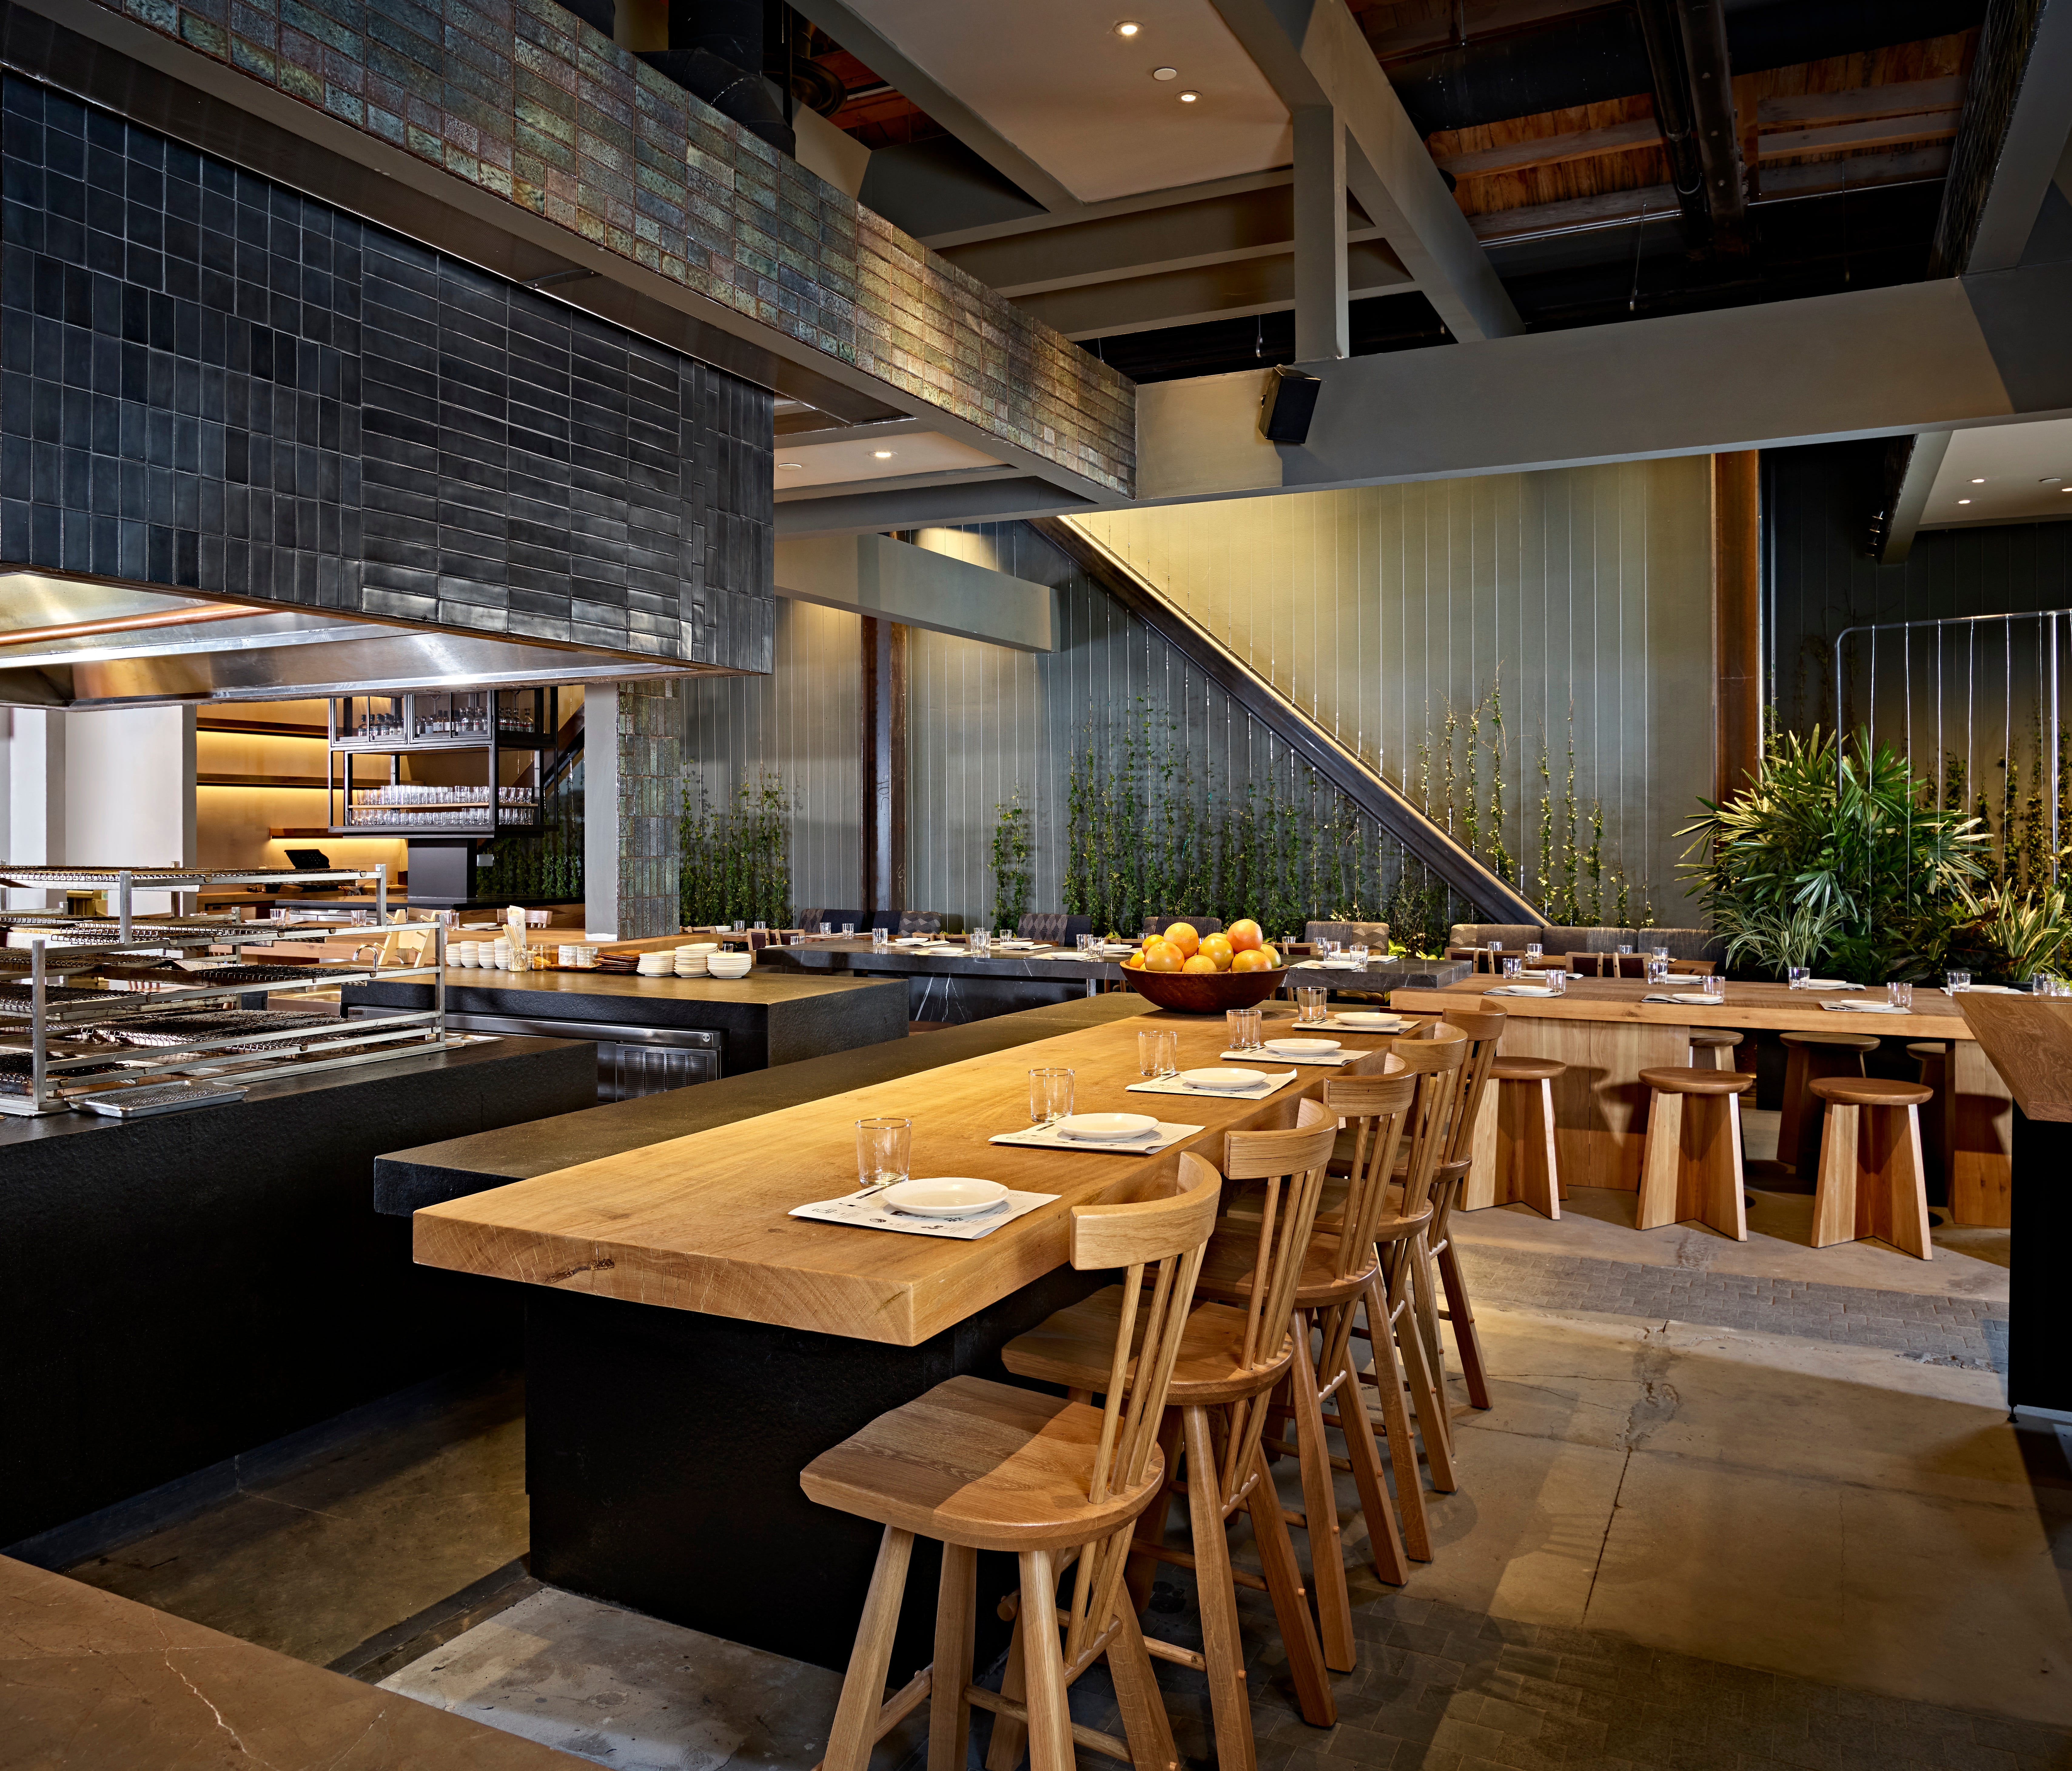 Japanese restaurant INKO NITO opened in Downtown Los Angeles on Dec. 28.